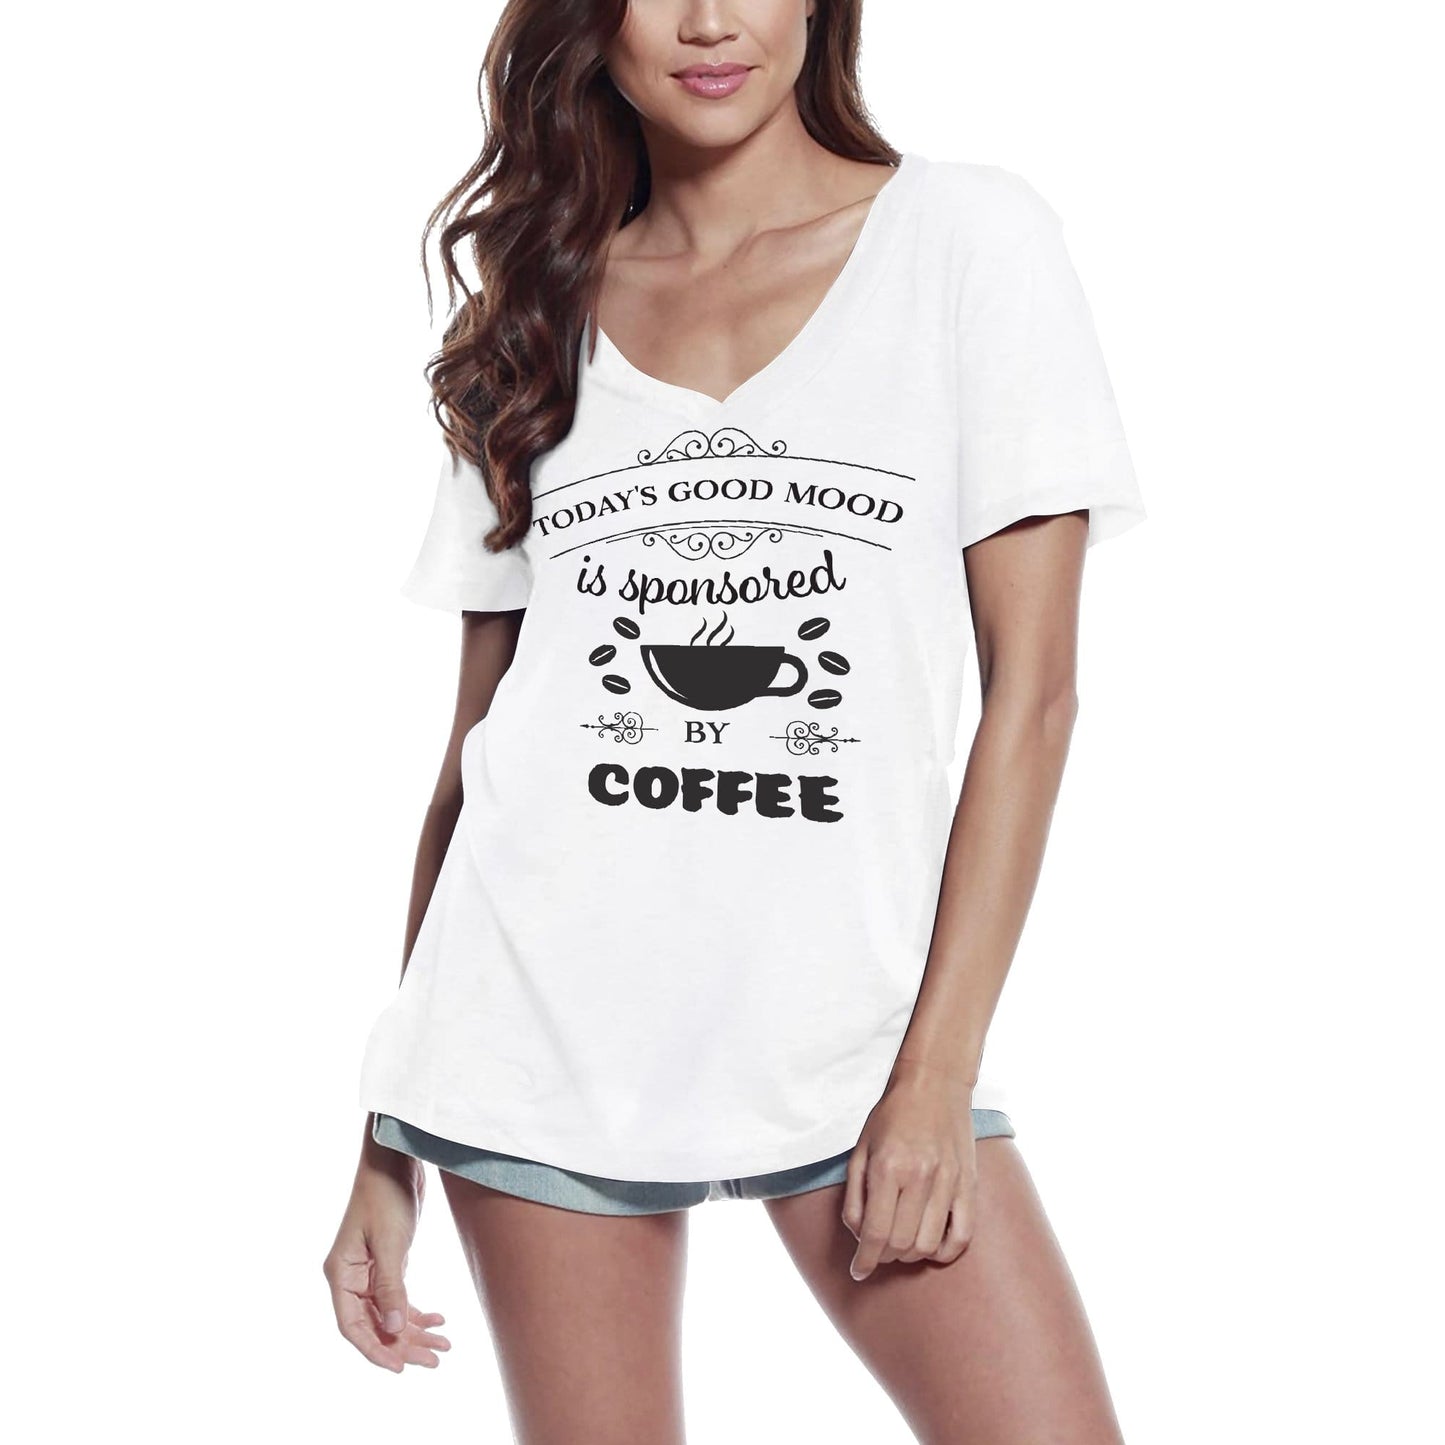 ULTRABASIC Women's T-Shirt Today's Good Mood is Sponsored by Coffee - Short Sleeve Tee Shirt Tops